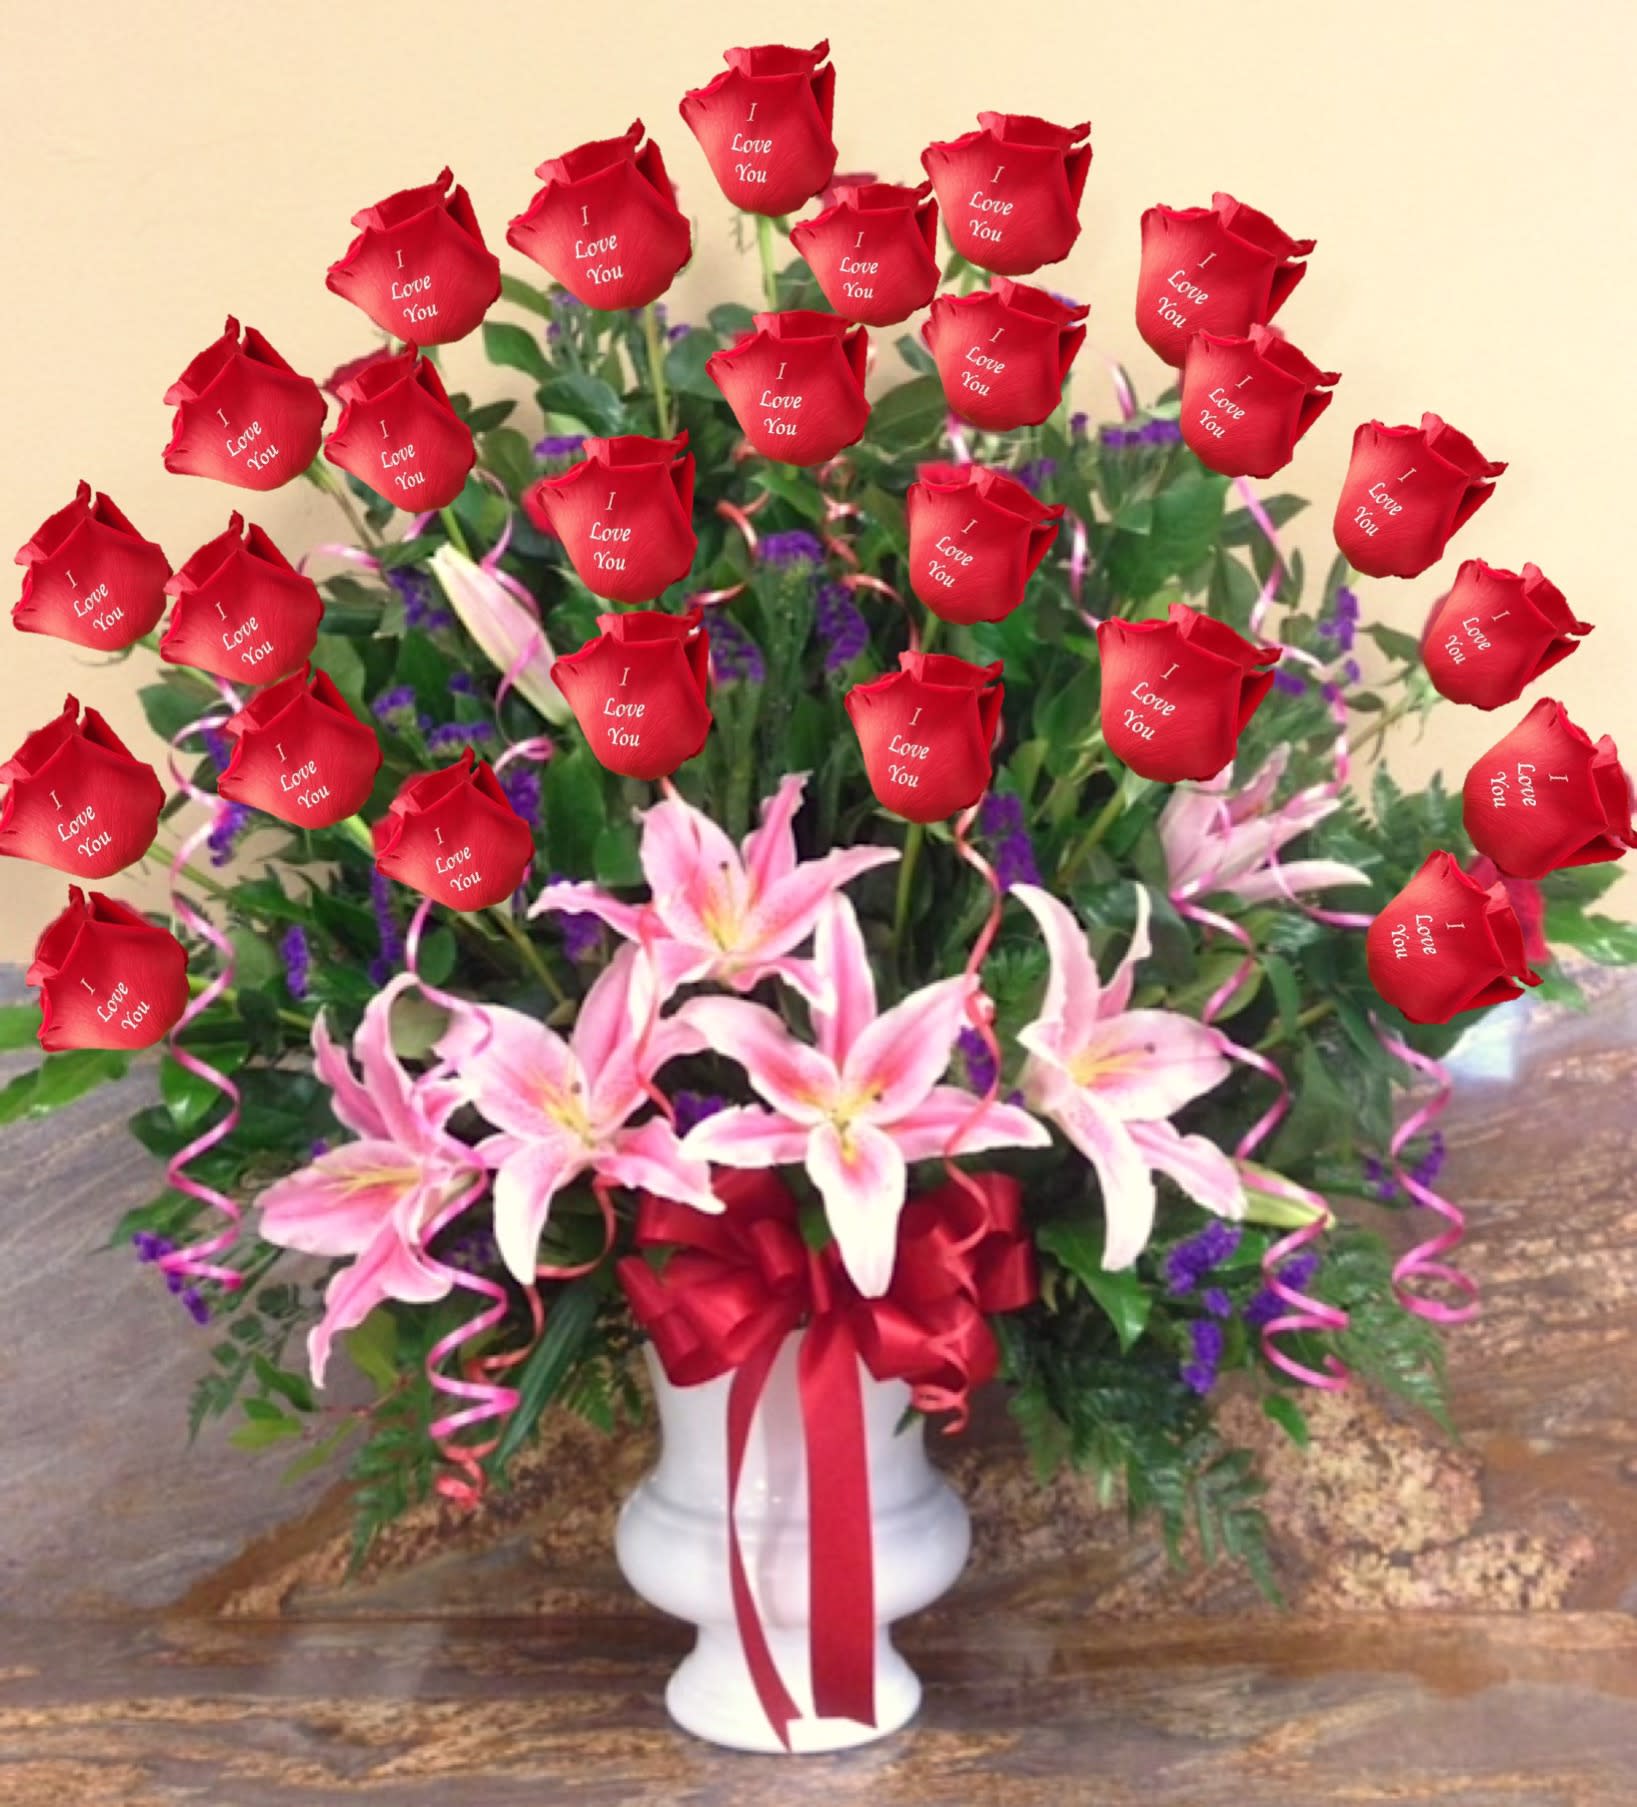 Strong Attraction - Romance is an emotional feeling of love for another person. This gorgeous large flower arrangement with 24 printed roses and stargazer lilies will show your emotions and fillings without saying anything more.